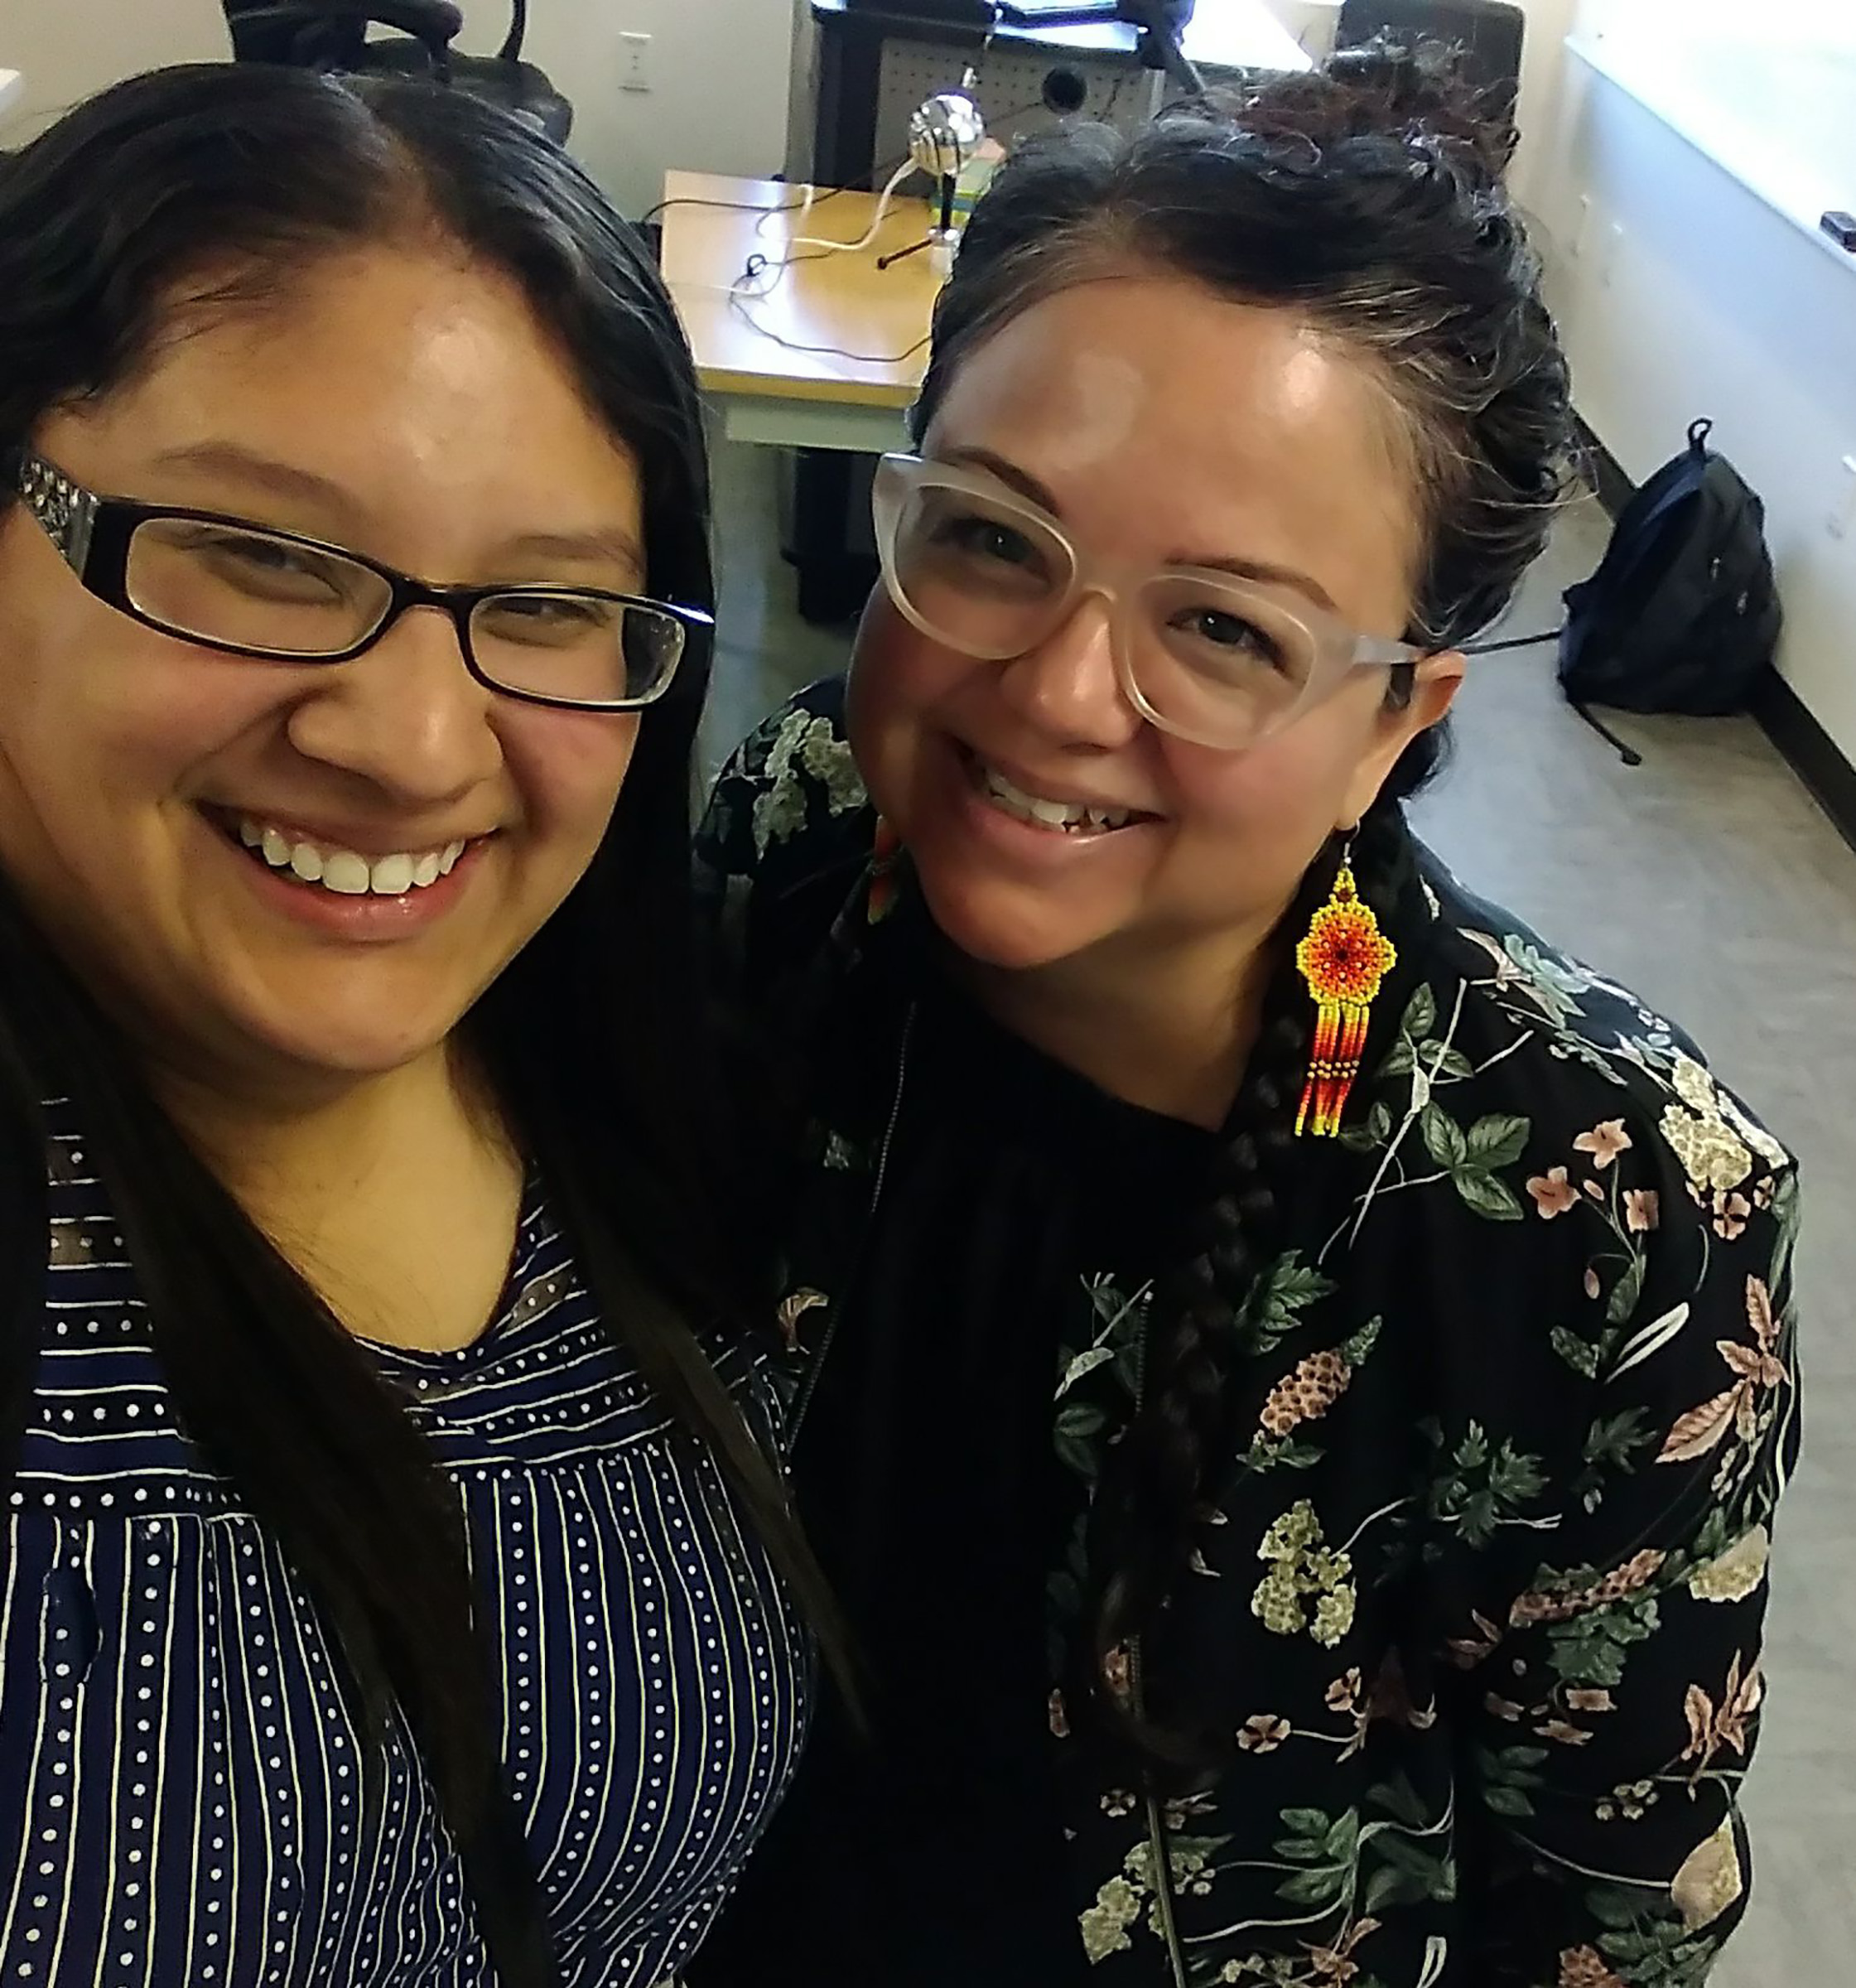 In 2018, Yesenia (right) visited Heritage to present a guest lecture as part of the RadLab project. She met with students like Cecilia De la Mora (left) and spoke about migration in the Yakima Valley.